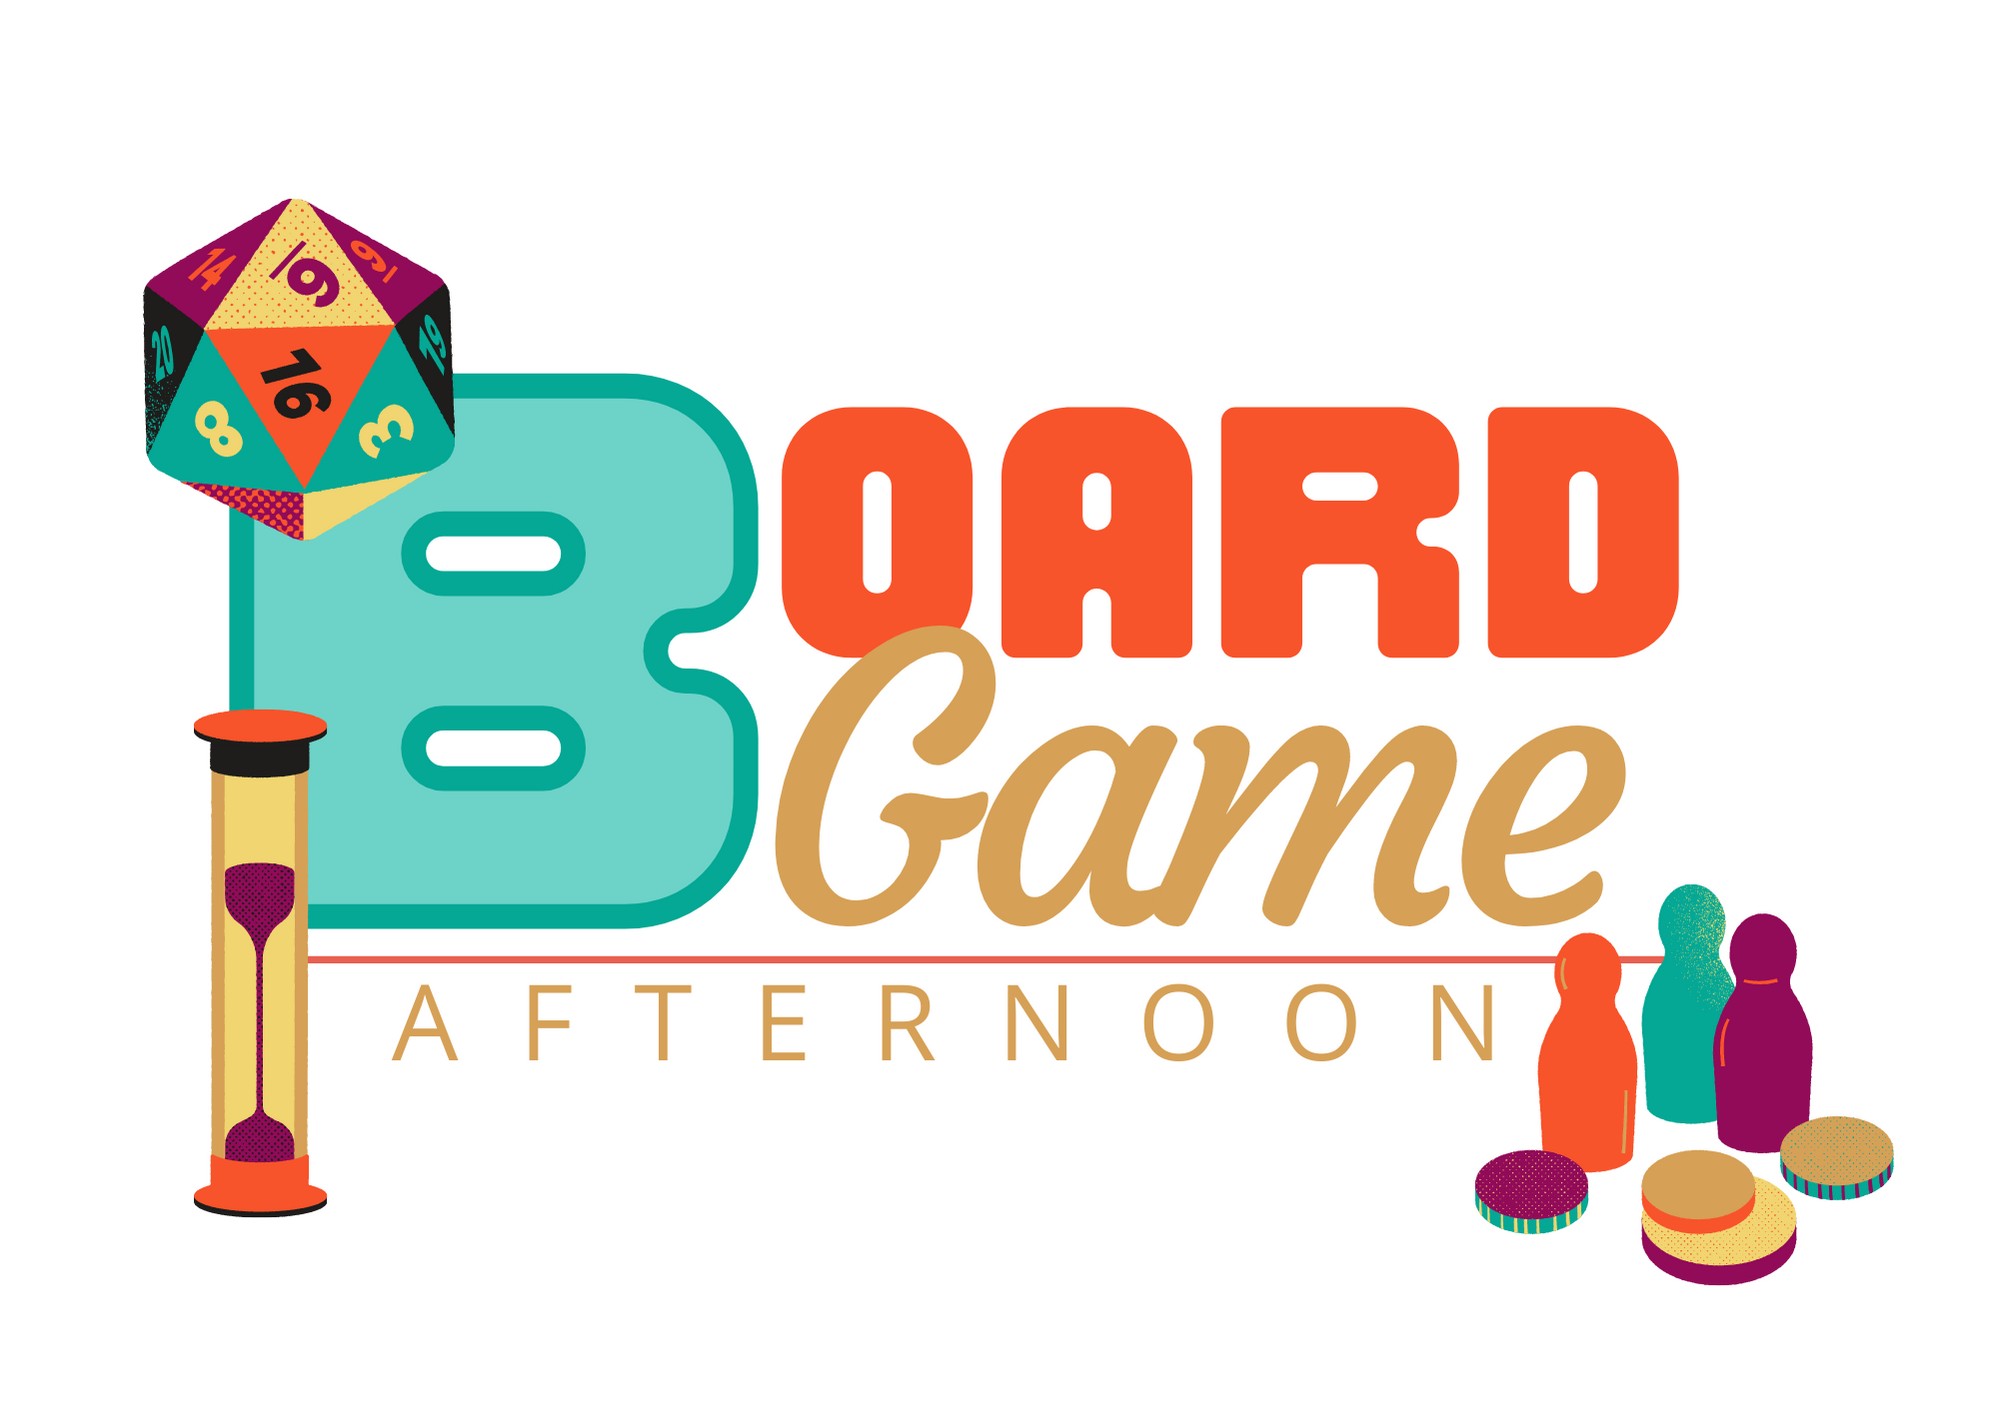 Text of image reads "Board Game Afternoon" with images of a 20-sided die, a sand timer, and game playing pieces